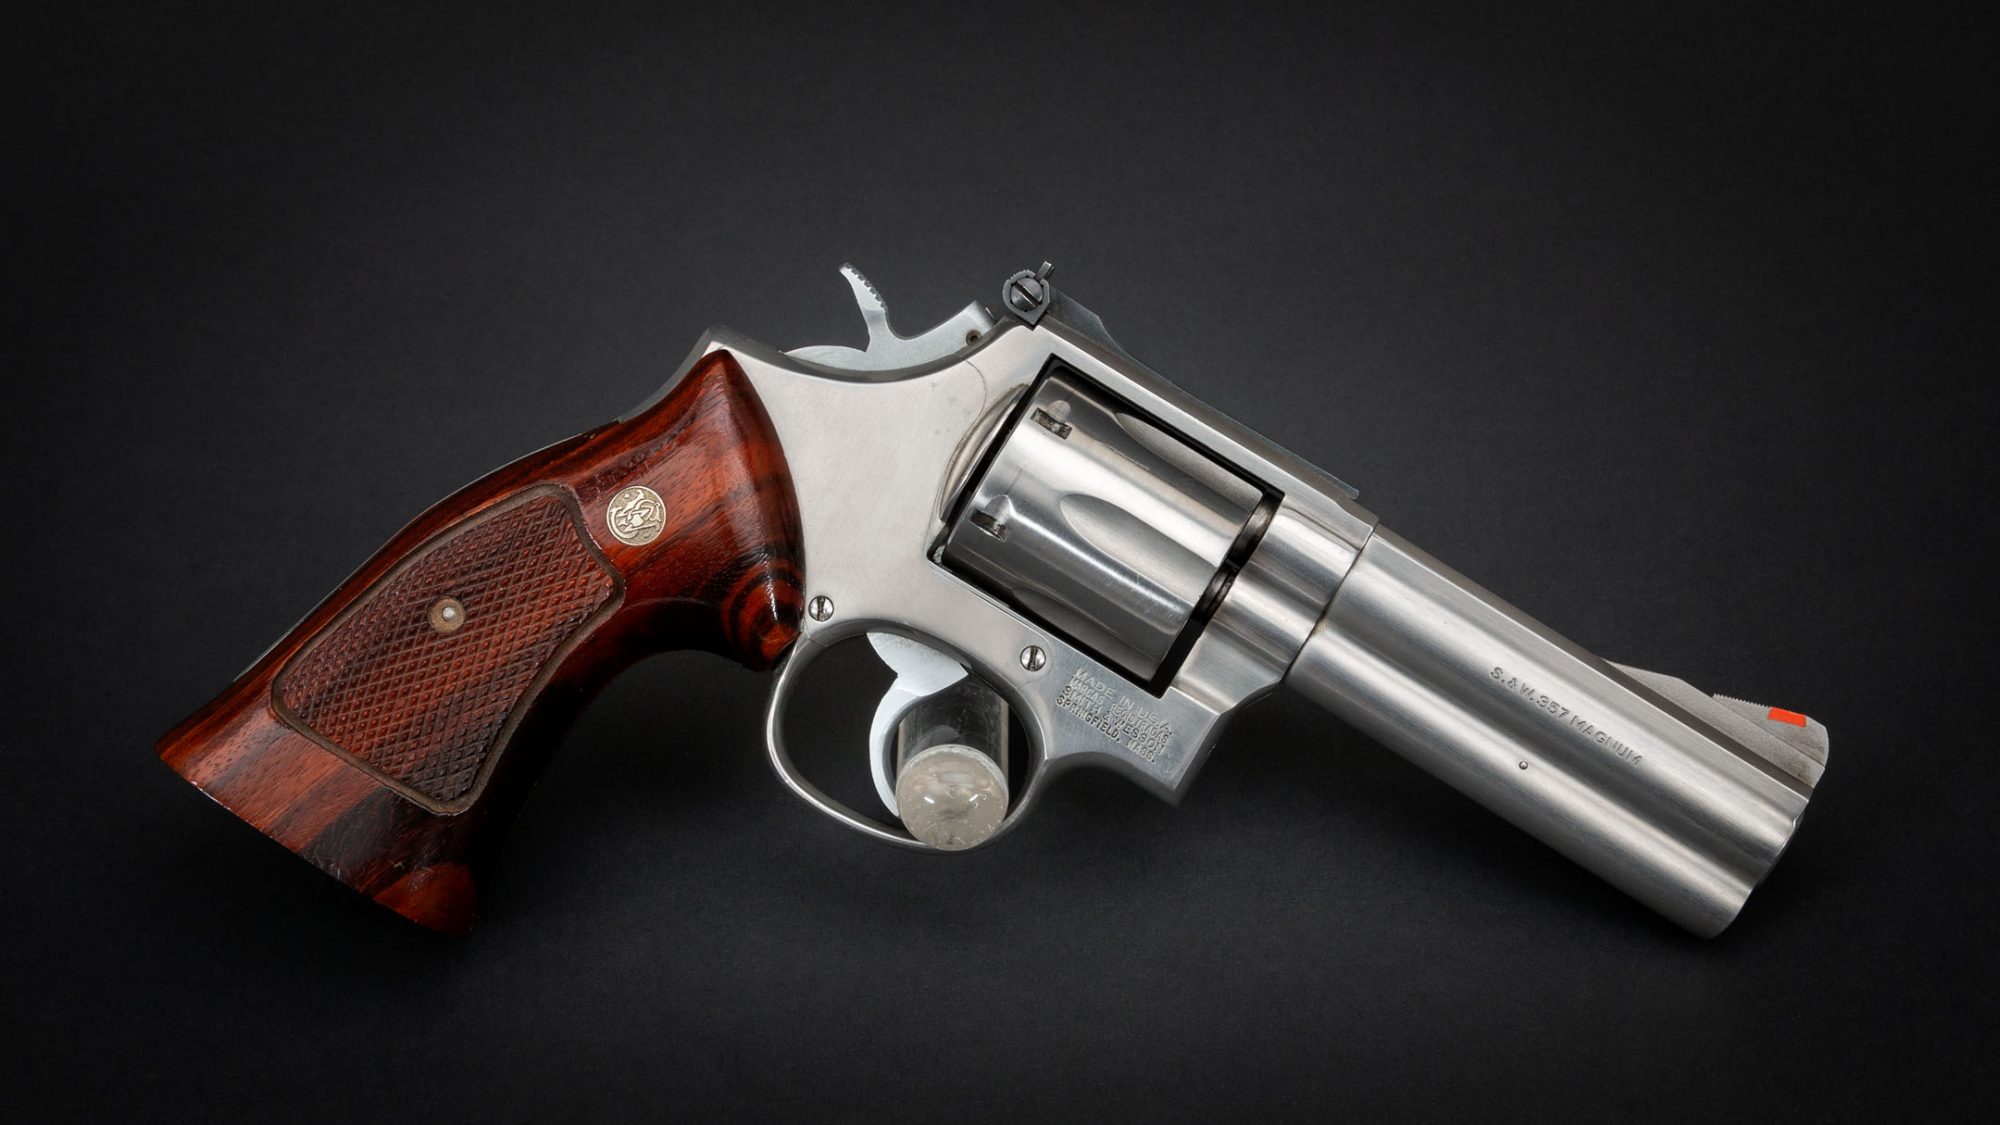 Smith & Wesson Model 686 in 357 Magnum, for sale by Turnbull Restoration Co. of Bloomfield, NY